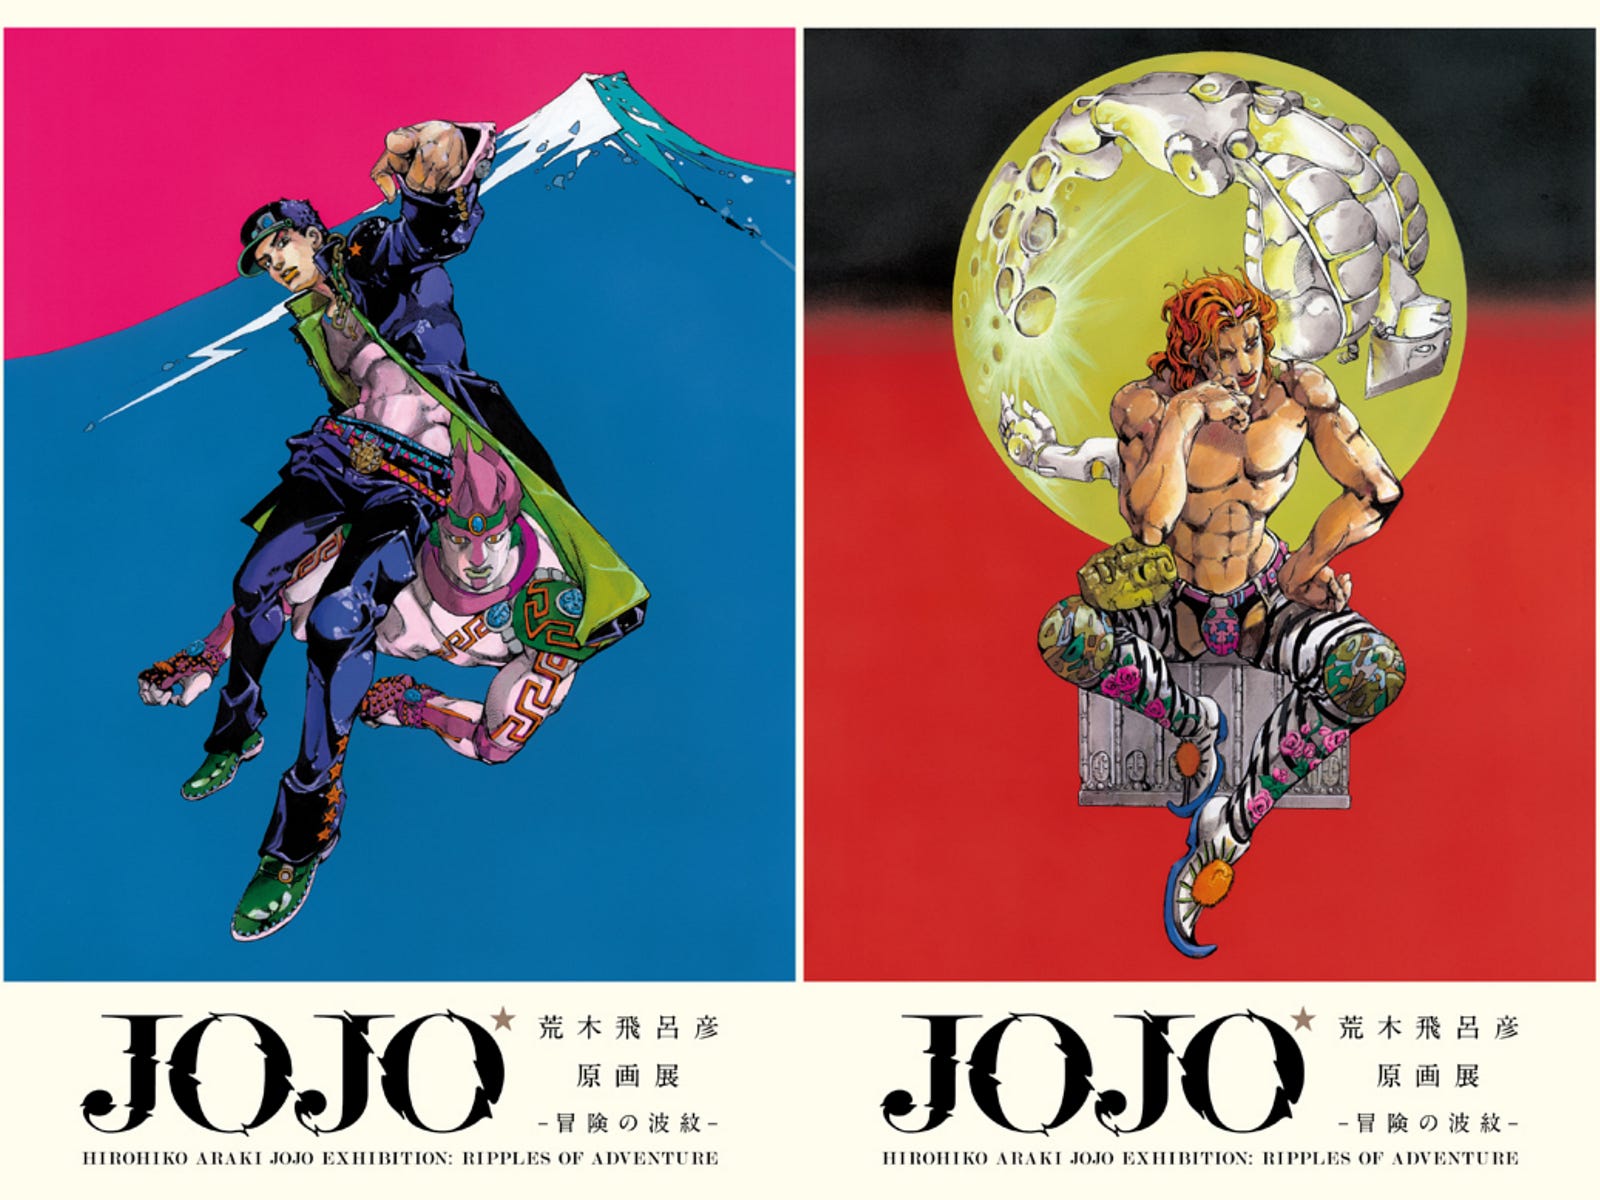 JOJO EXHIBITION RIPPLES OF ADVENTURE Is Coming To Tokyo And Osaka